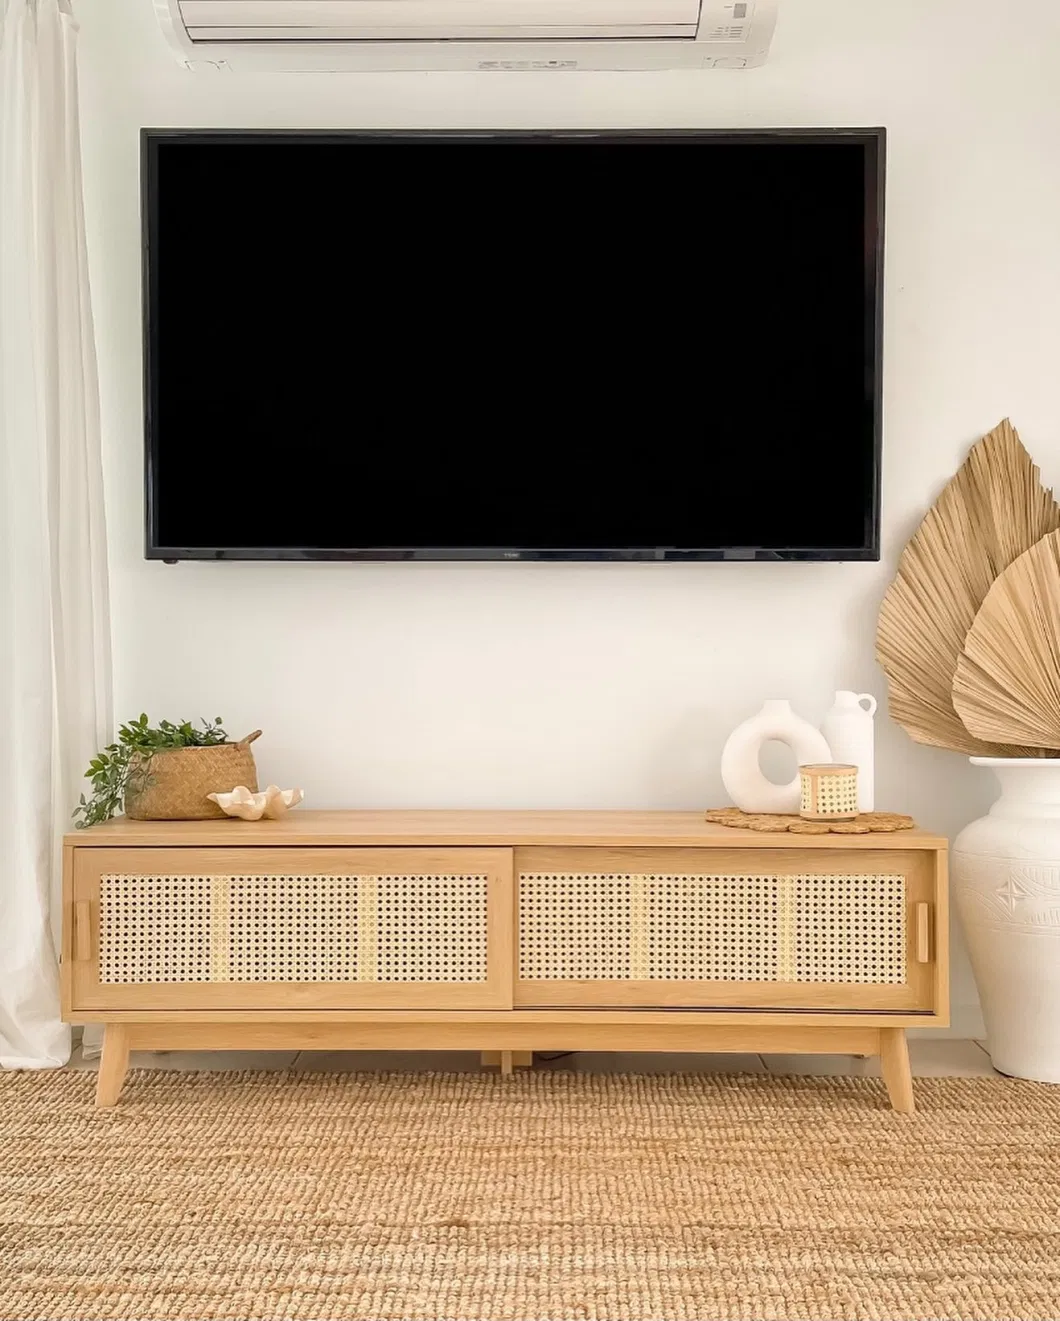 New Product Nordic Contemporary Oak Slide Door TV Cabinet Natural Rattan Wooden TV Stands Wall Storage TV Unit for Home Living Room Hotel Furniture